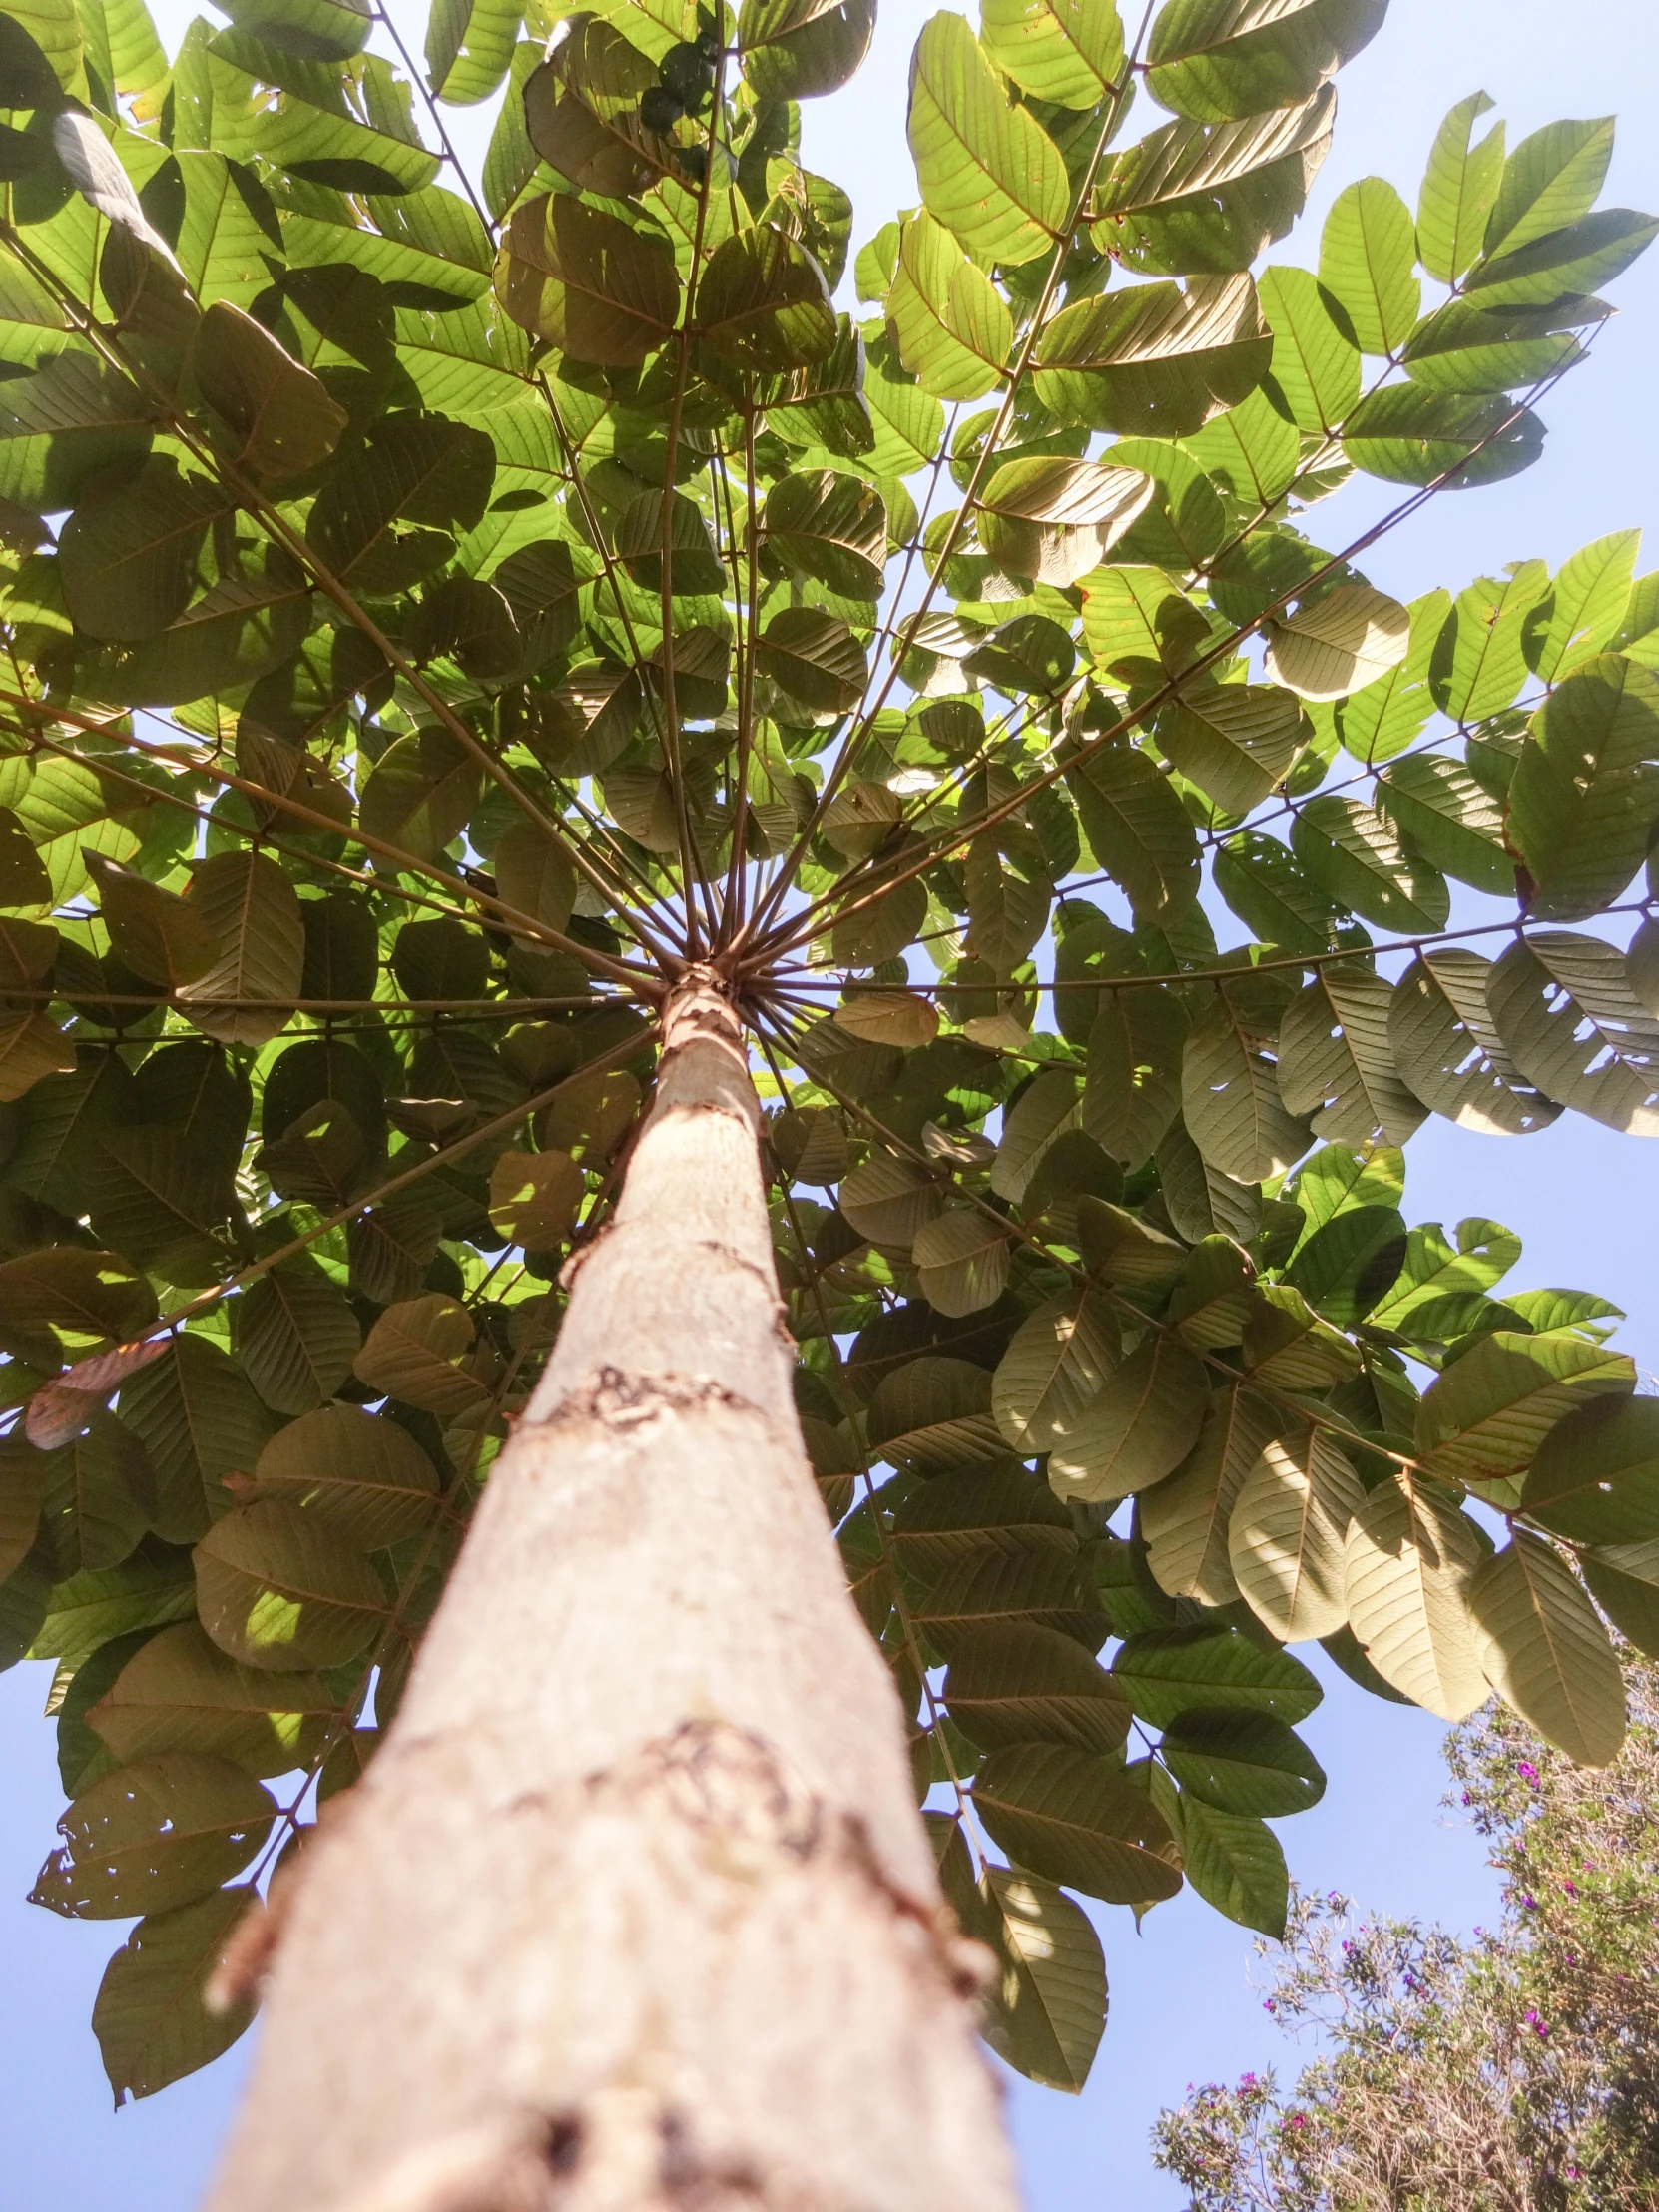 view looking up at the top of a leafy, tree - like tree